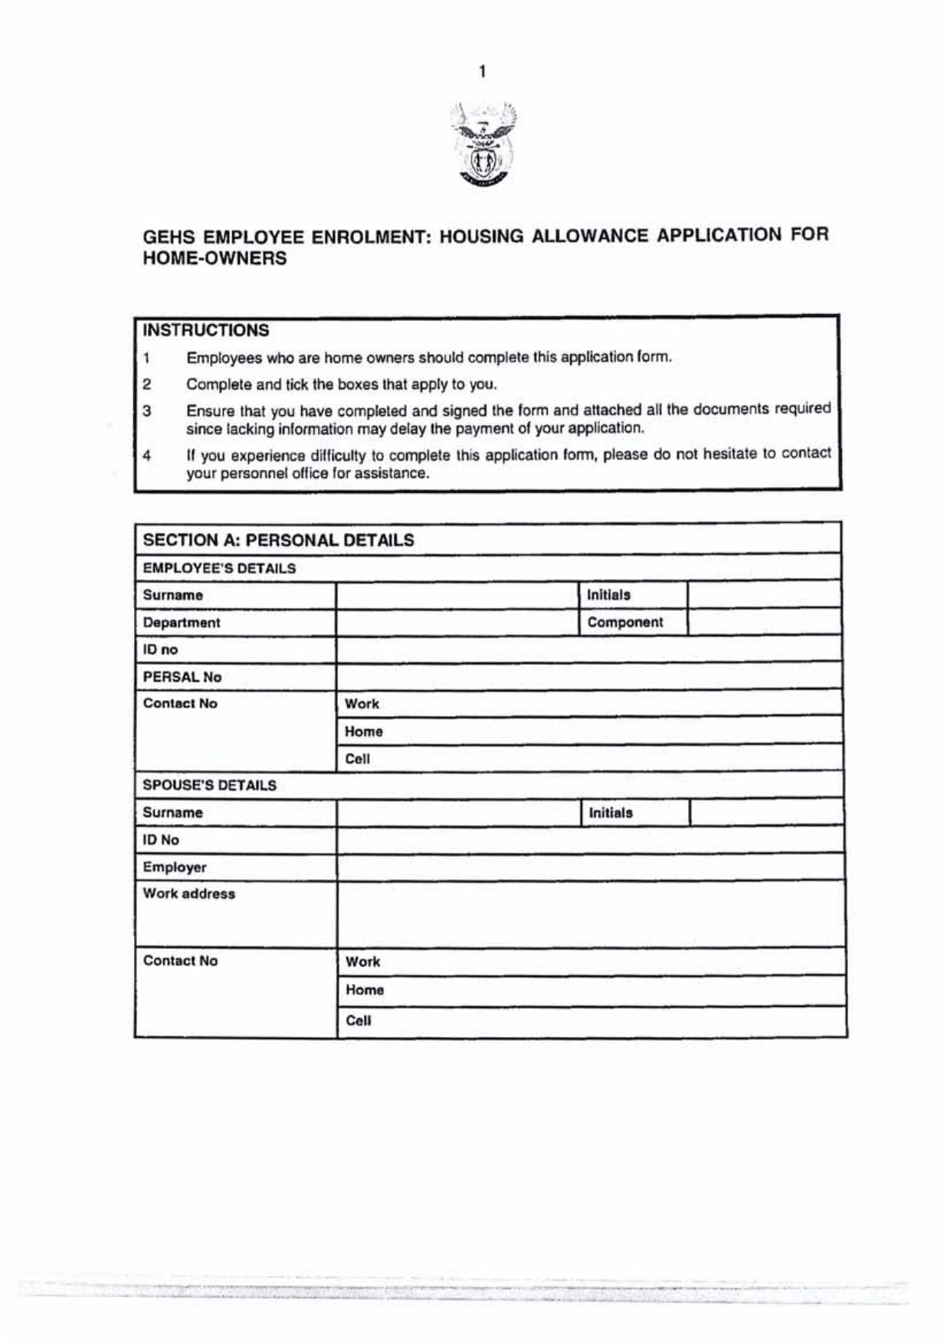 Gehs Employee Enrolment: Housing Allowance Application for Home-Owners - Western Cape, South Africa, Page 1